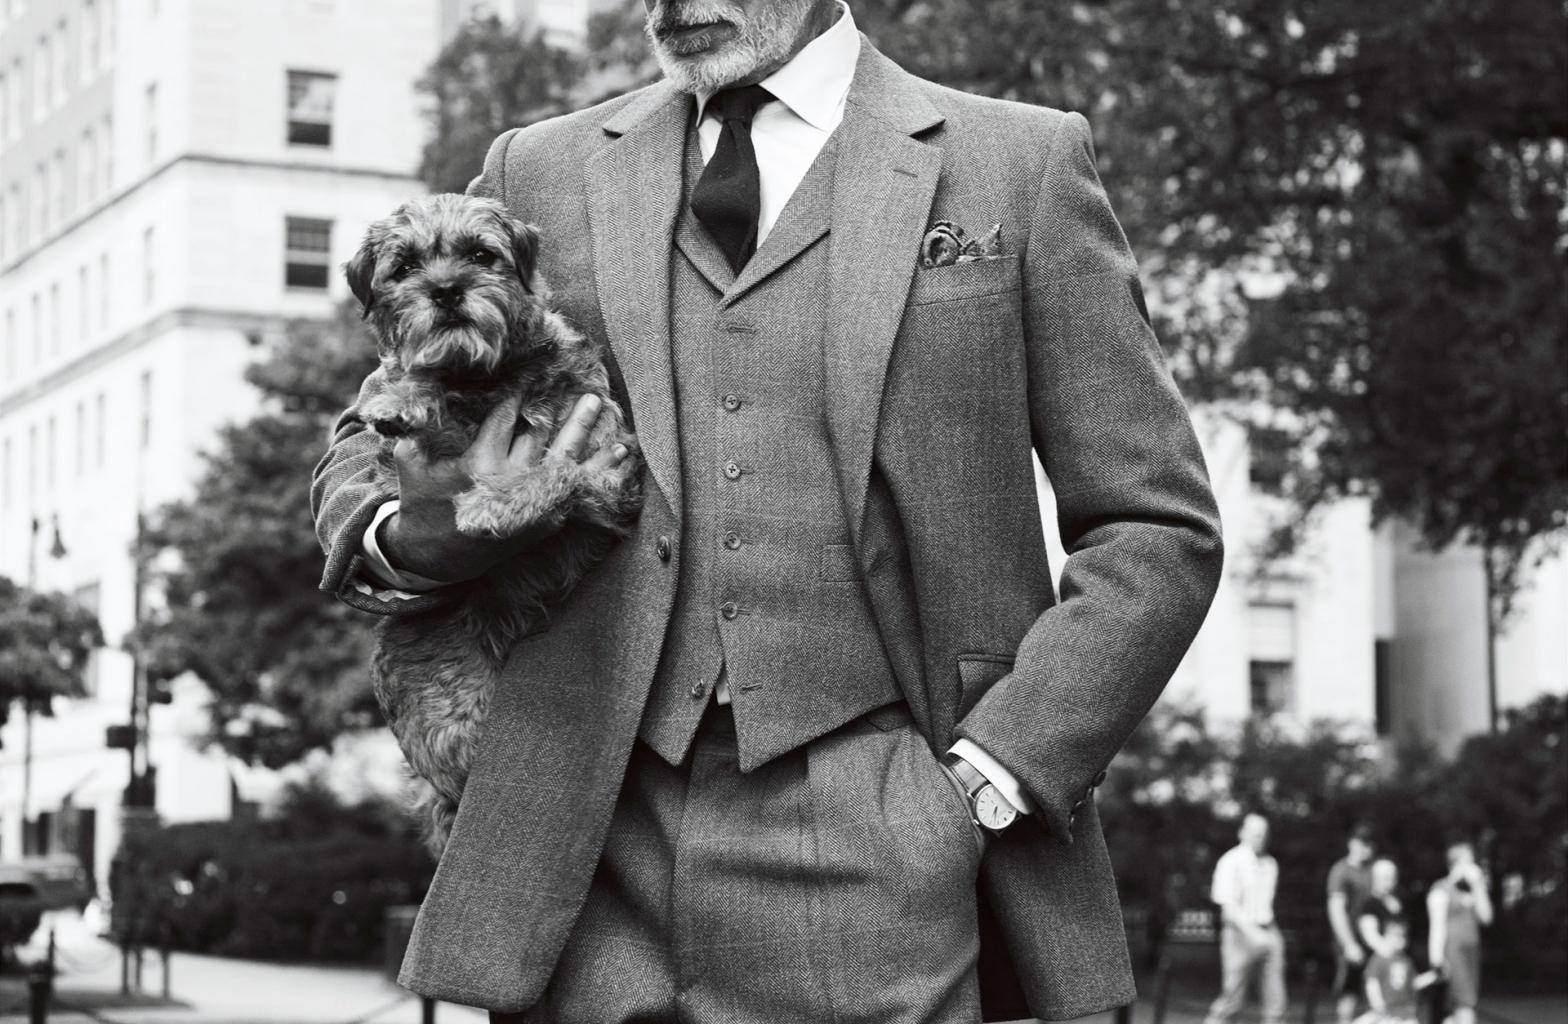 Man in a suit posing with his dog in front of The Newbury.